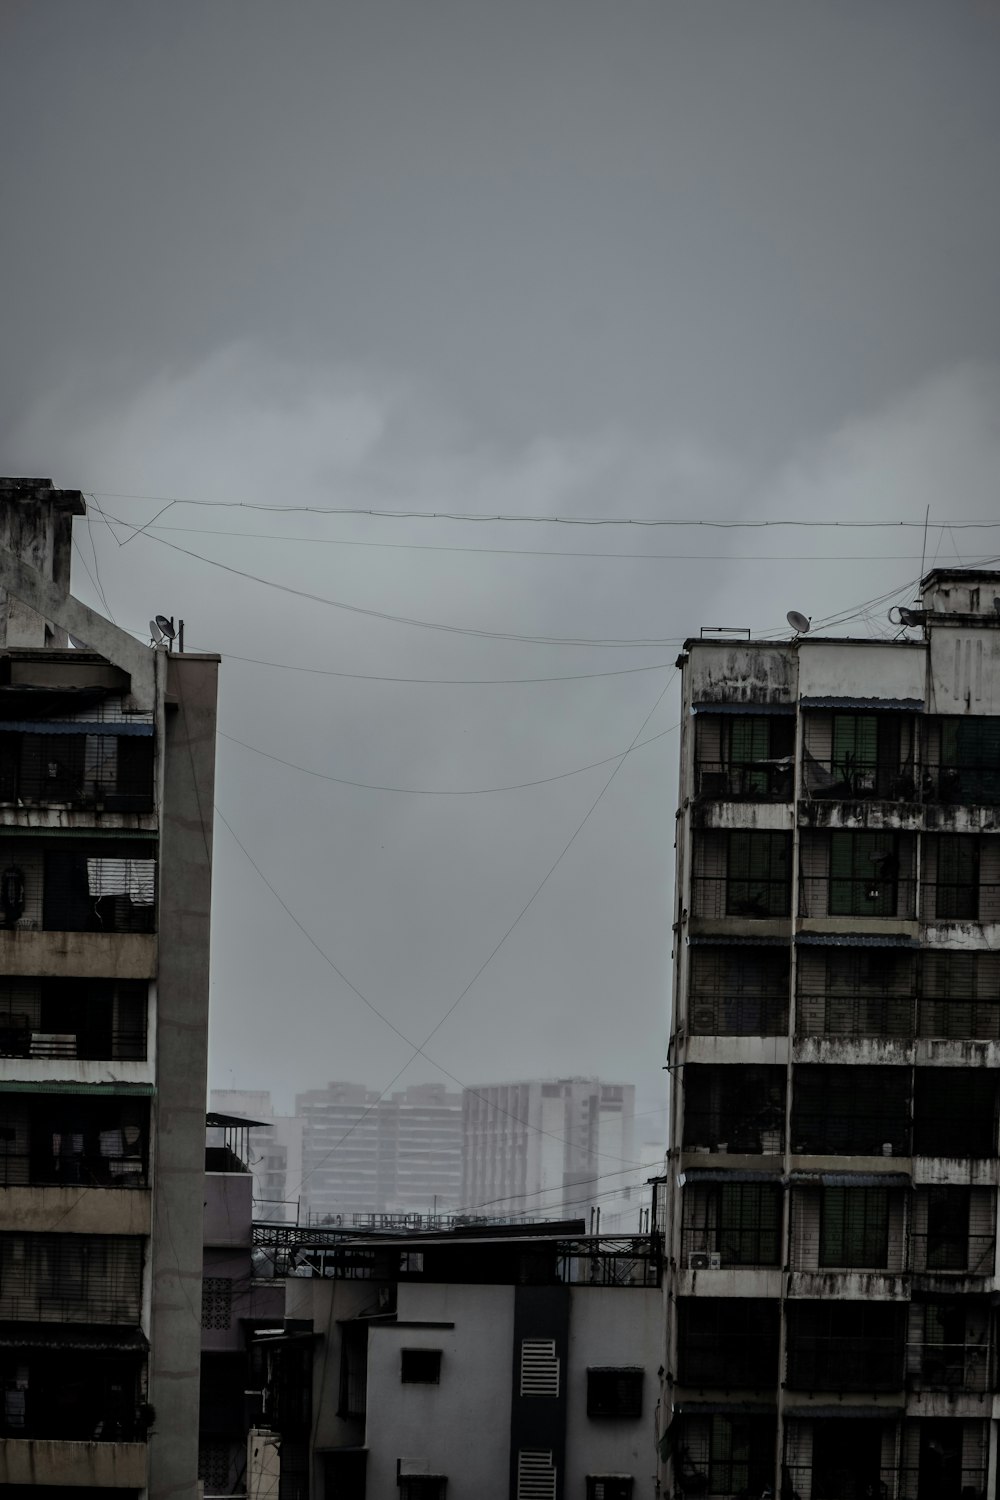 a group of buildings with wires